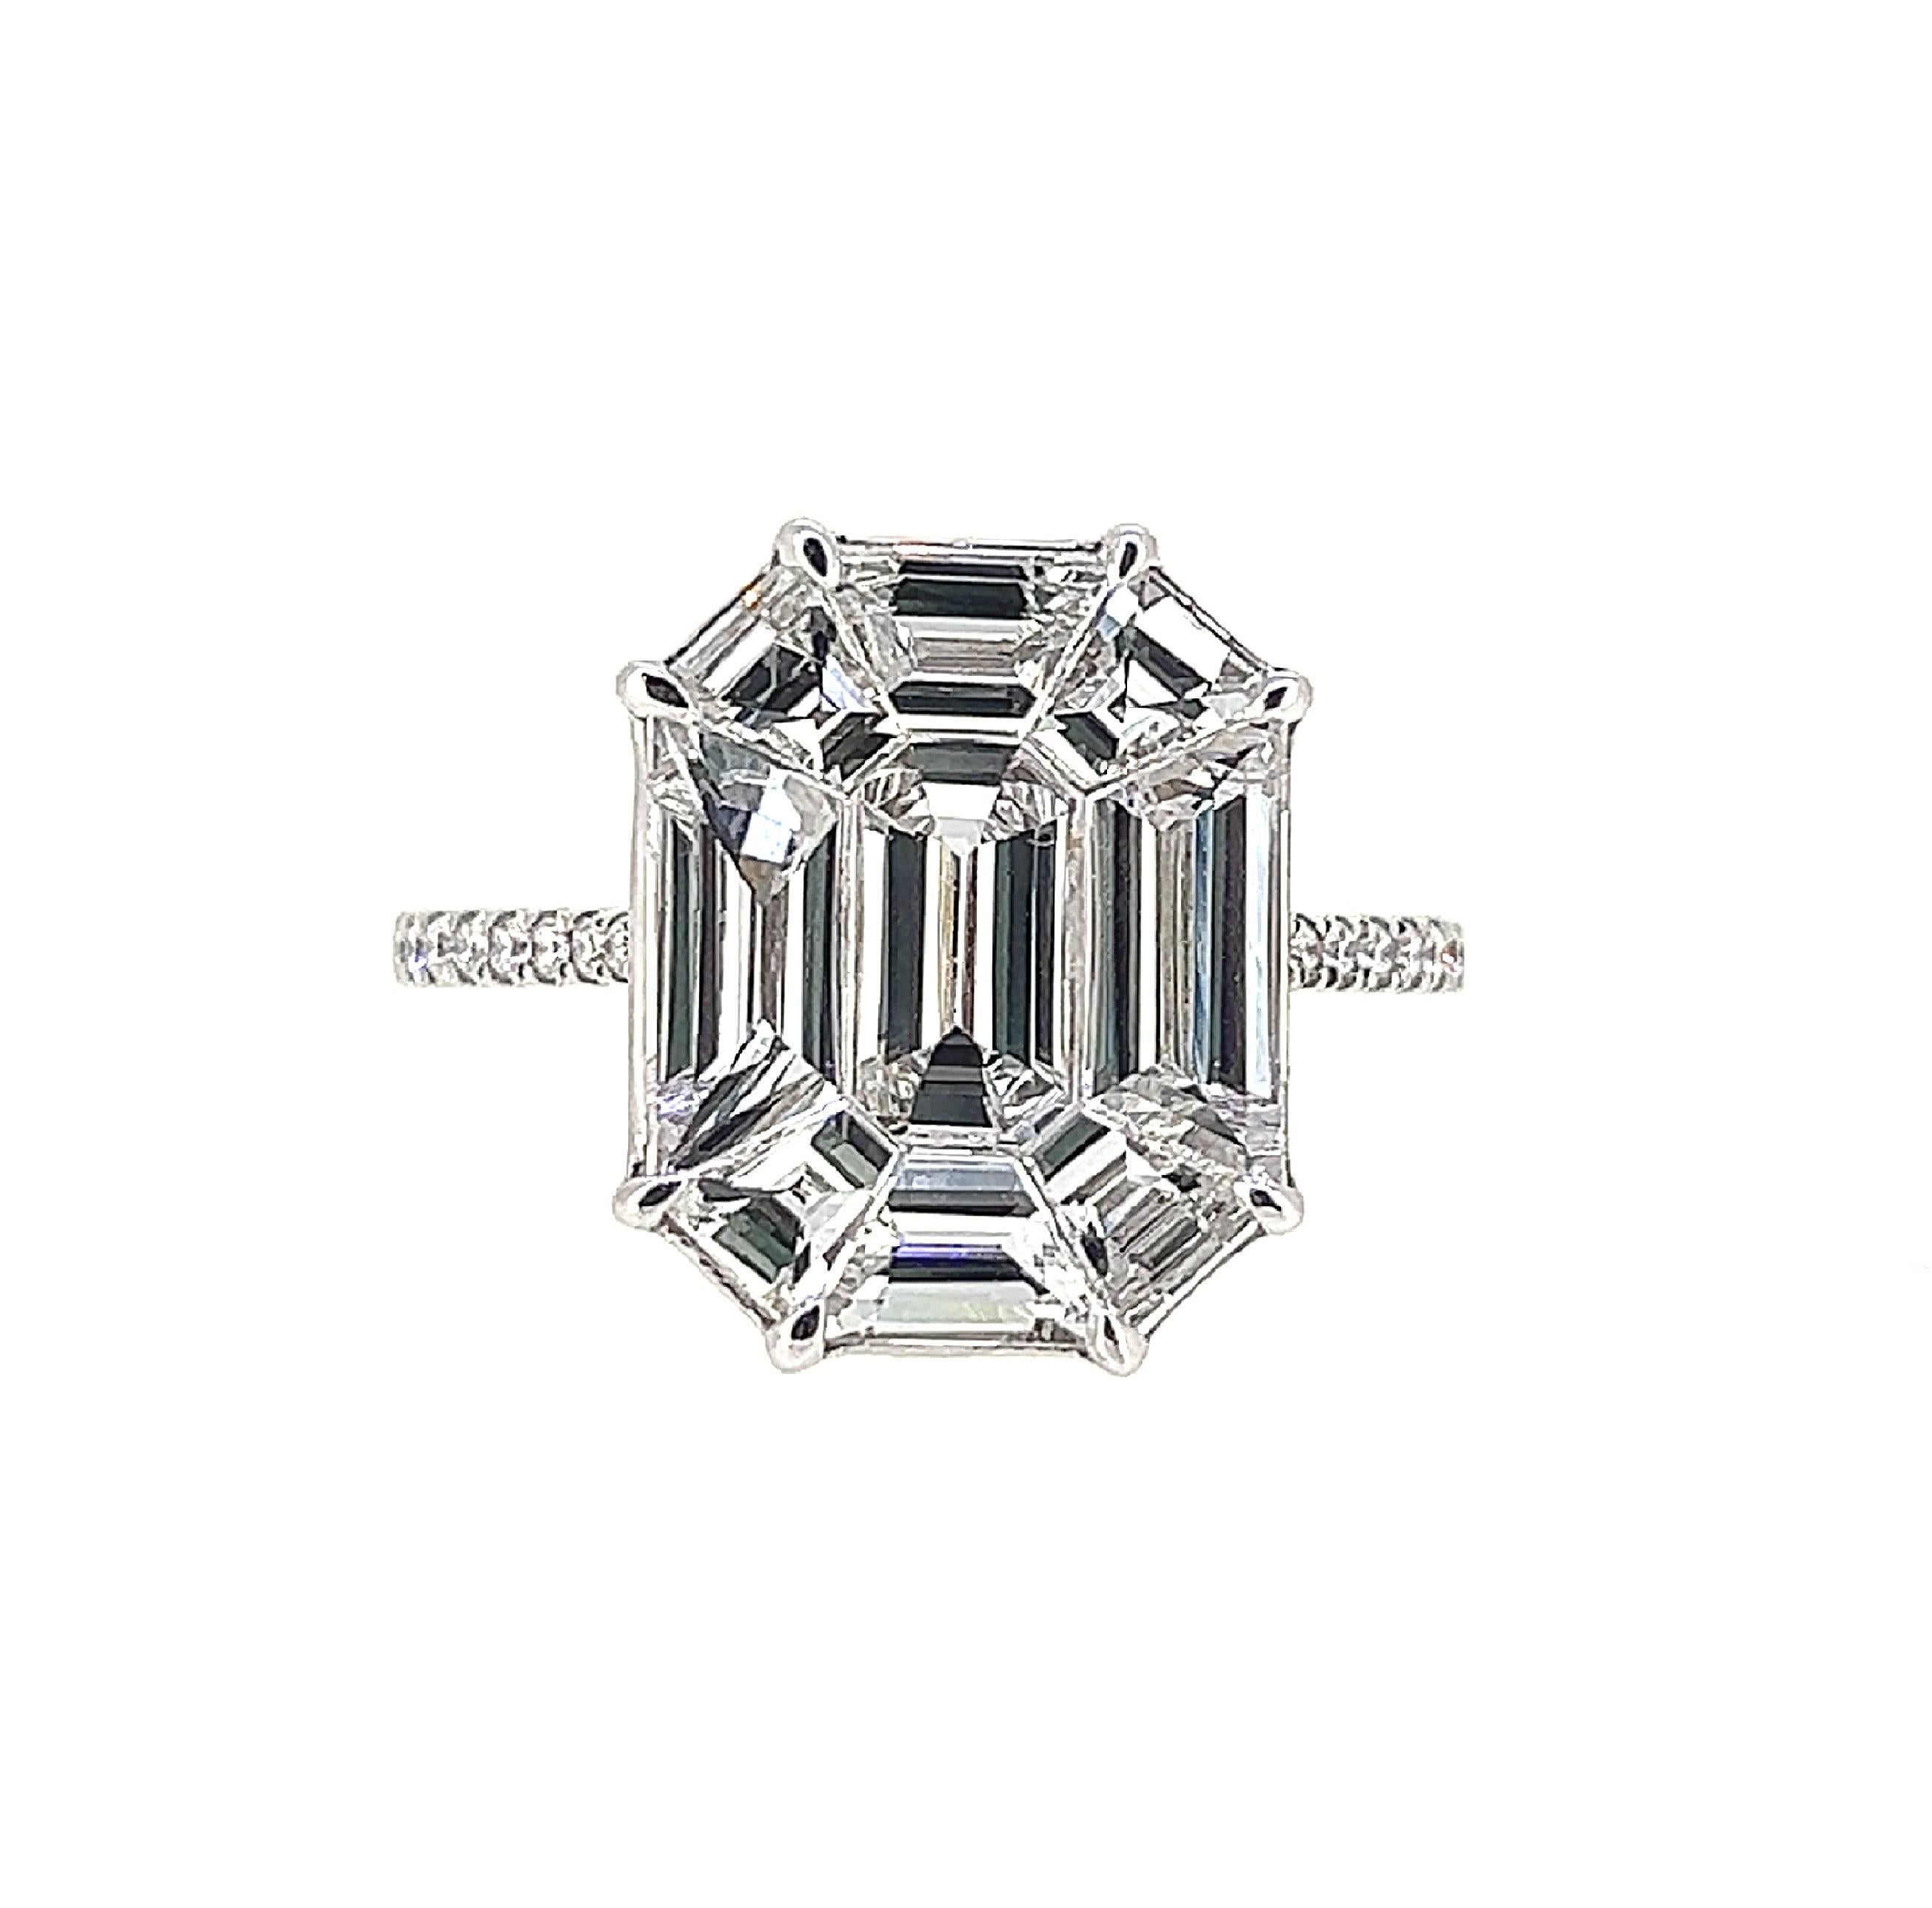 This is an elegant and classy ring that makes a beautiful gift; it’s illustrated table size looks as grand as a 10 Carat Diamond!  Crafted on 18 Karat White Gold, this invisible setting Diamond Ring is a crafty design which features 9 Step cut